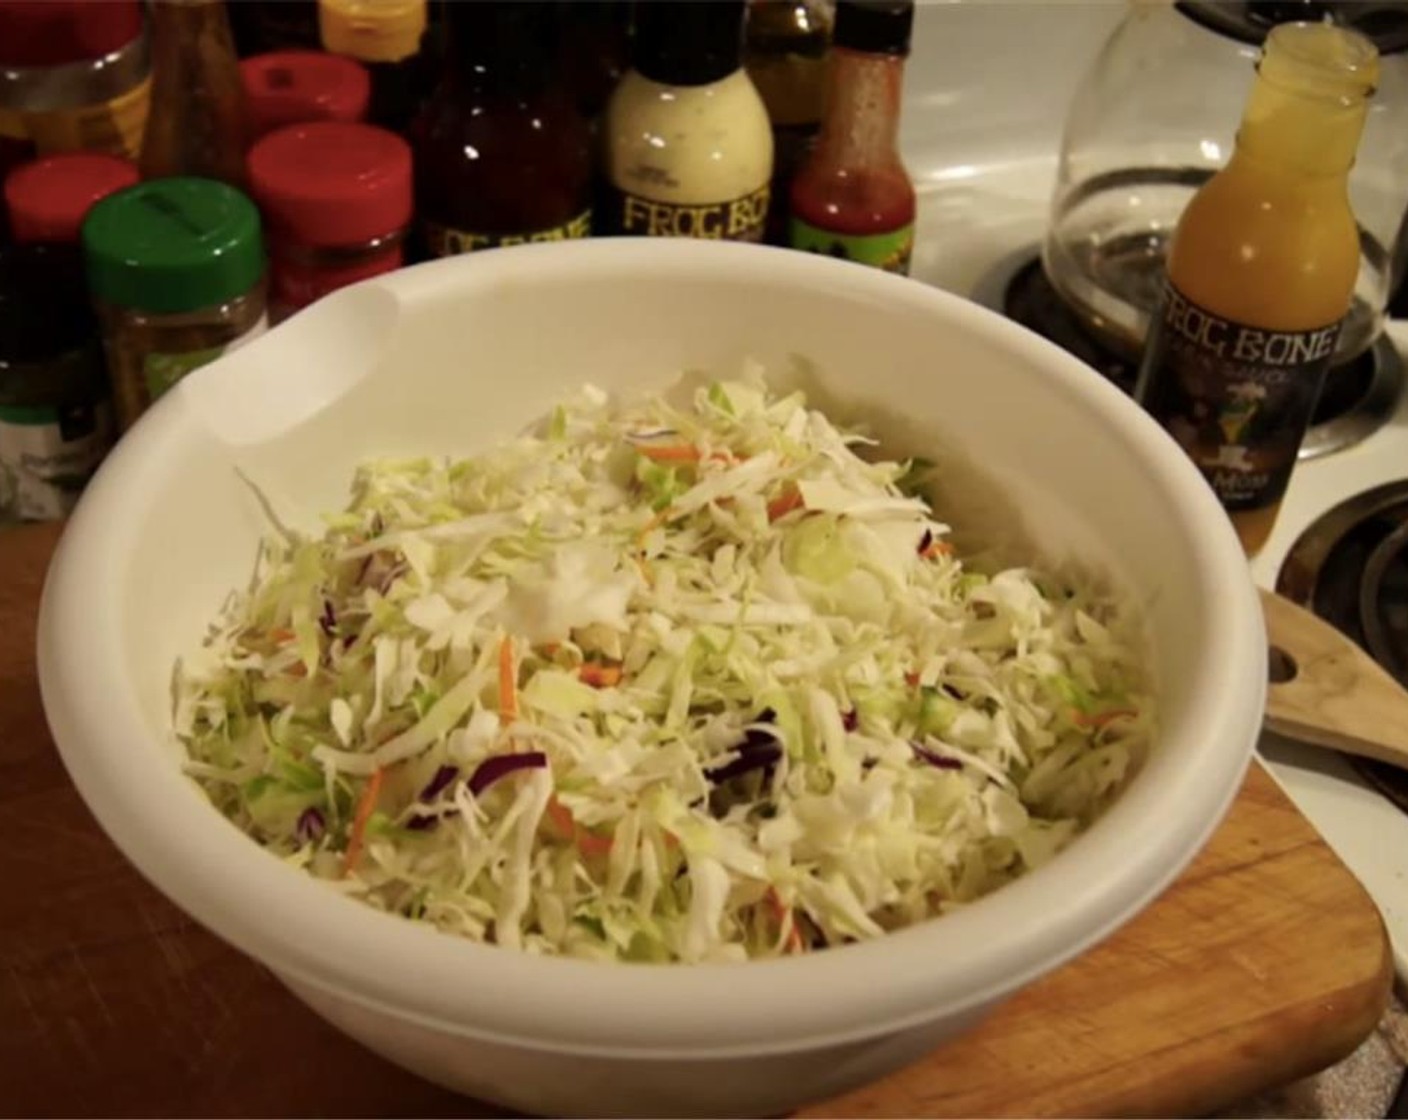 step 8 While pork is cooking, assemble the coleslaw. Place Green Cabbage (1/2 head), Red Cabbage (1/2 head), and Carrot (1) into a large bowl. Mix them together well.